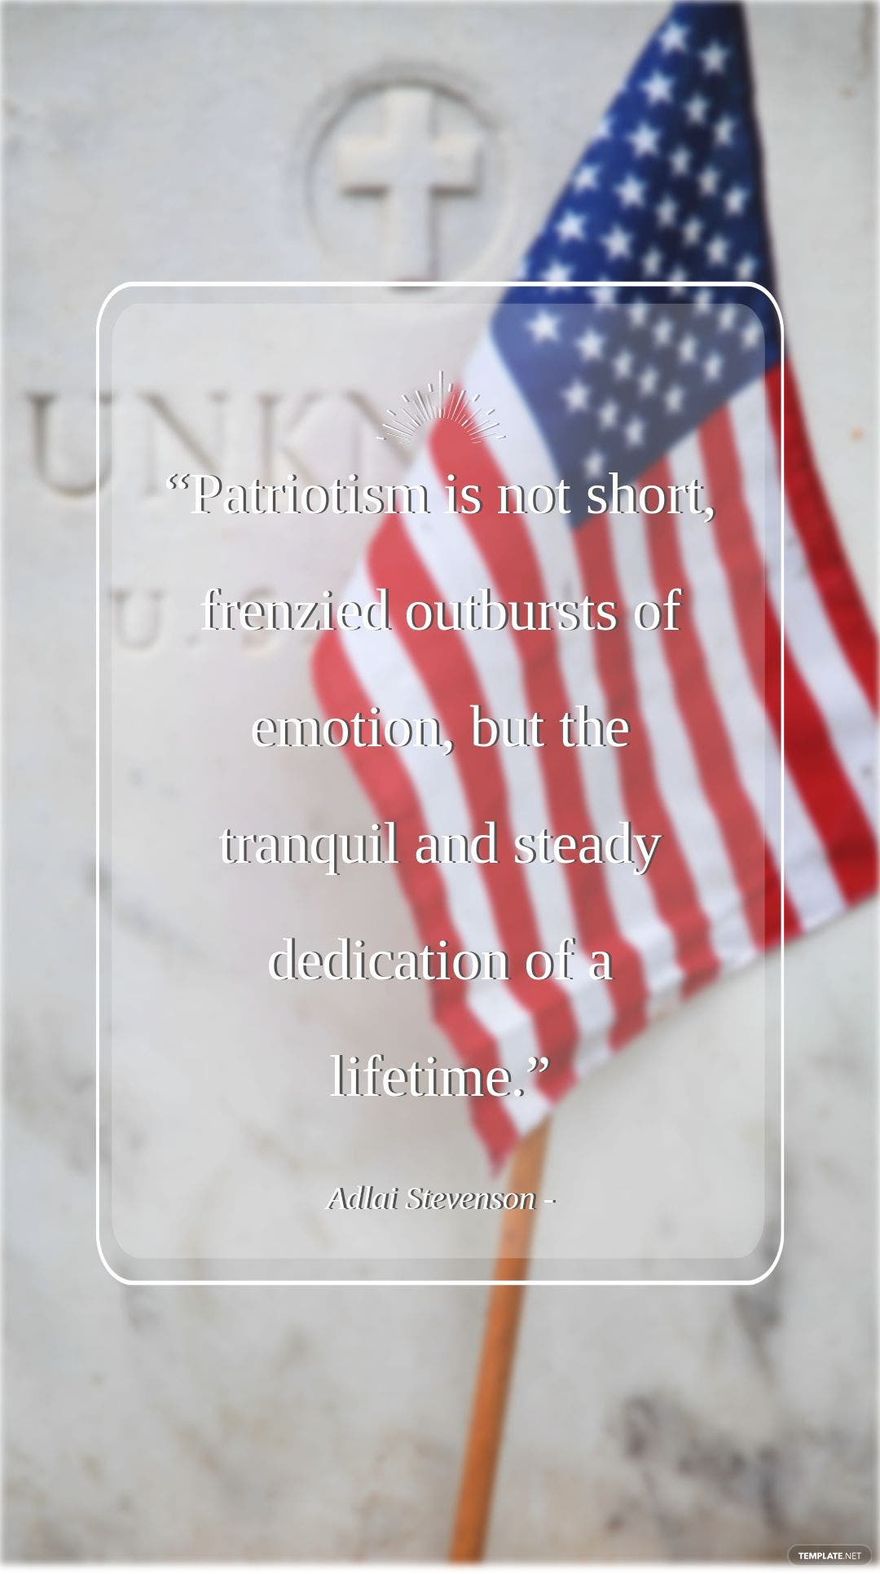 Adlai Stevenson - “Patriotism is not short, frenzied outbursts of emotion, but the tranquil and steady dedication of a lifetime.”